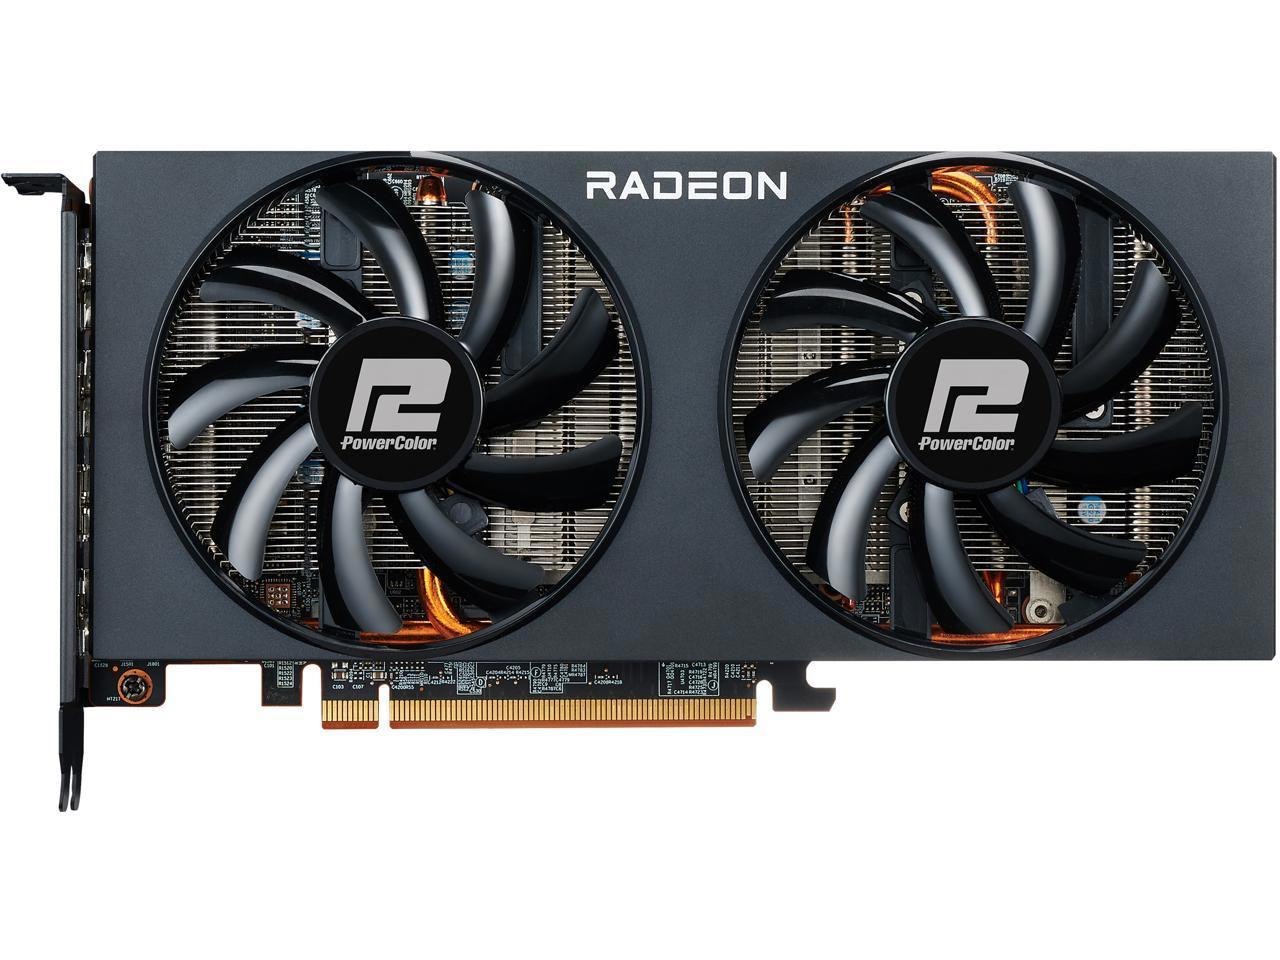 PowerColor Fighter Amd Radeon RX 6700 XT Gaming Graphics Card With 12GB GDDR6 Memory